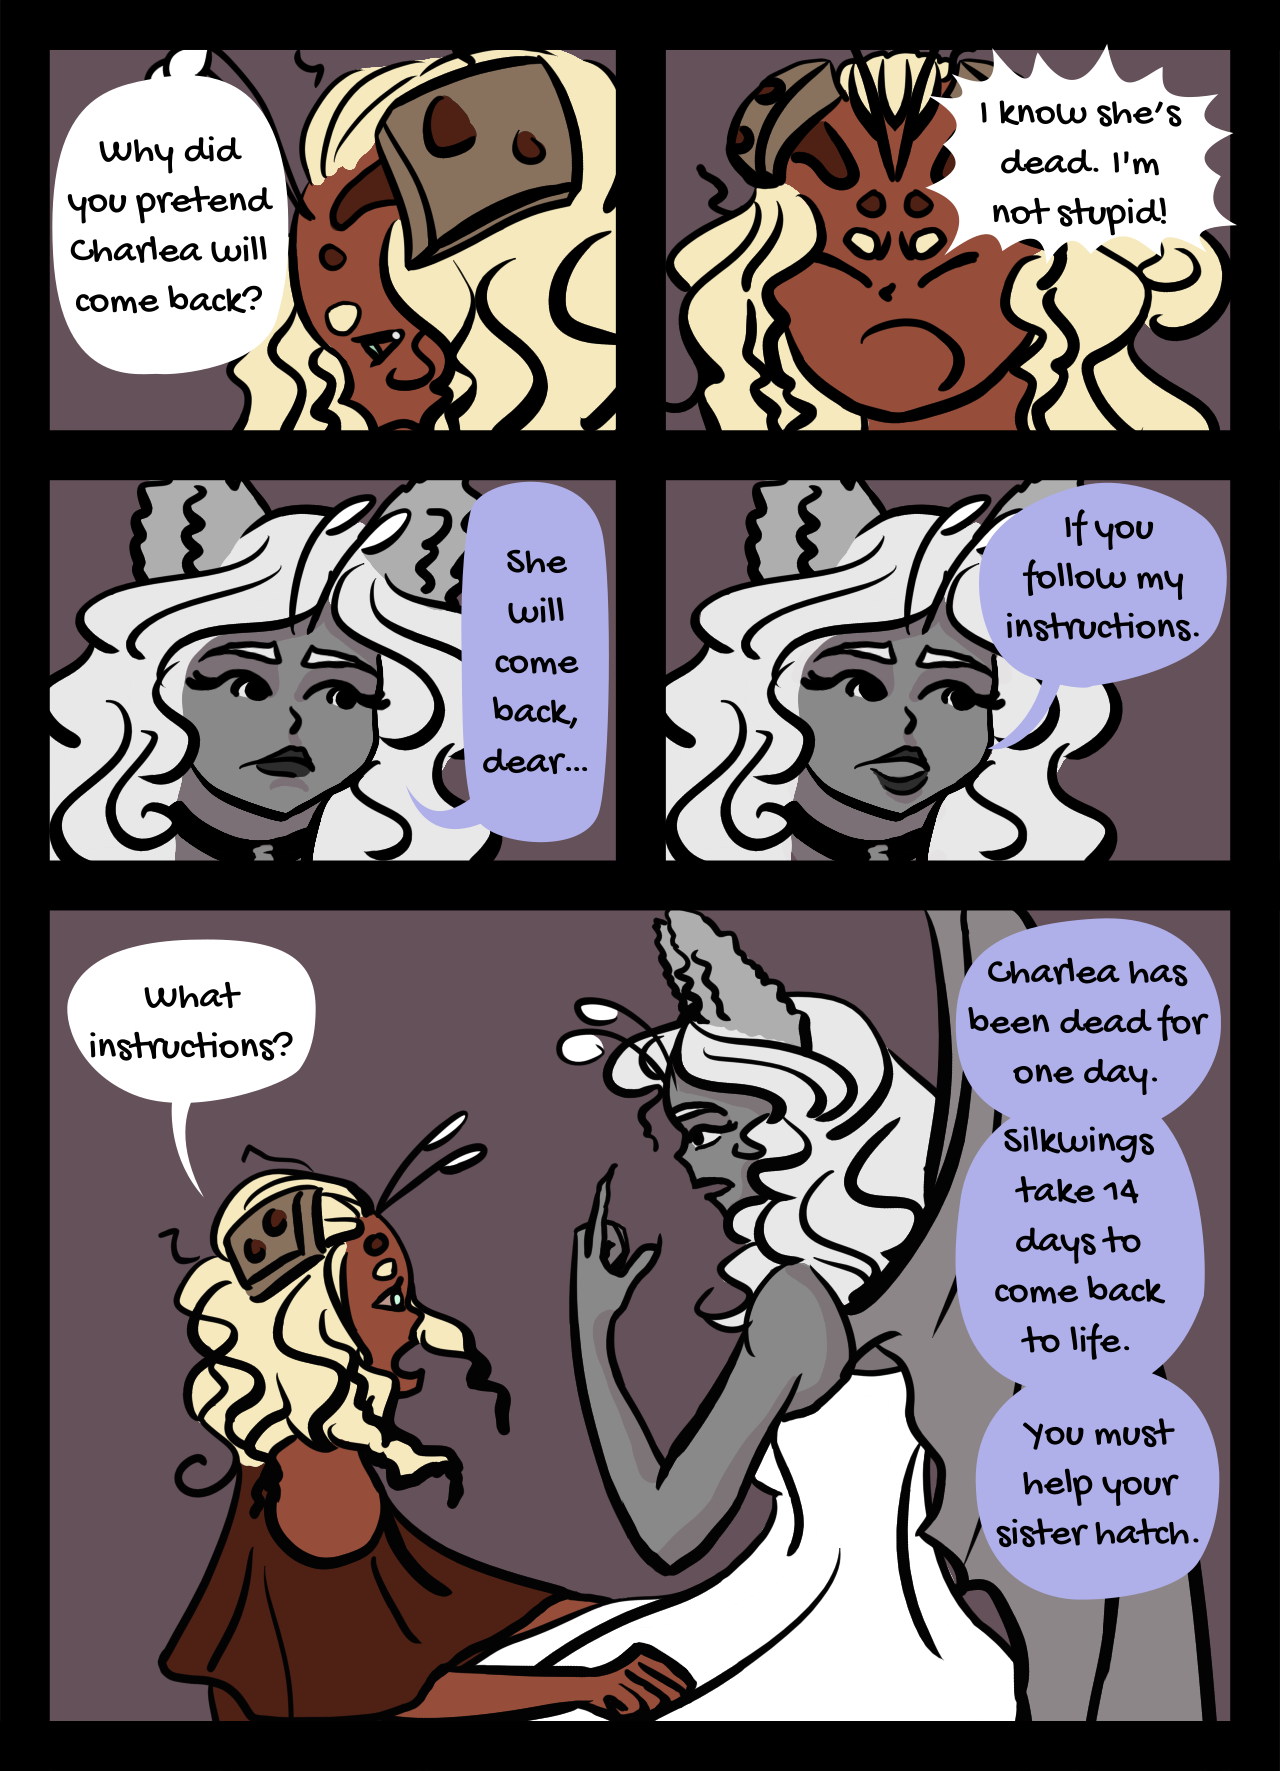 Page 19: An alien girl, with curly hair, yells at a winged woman, named Crystal. Crystal tells the girl that her sister will come back to life if she waits 14 days to help her sister hatch.